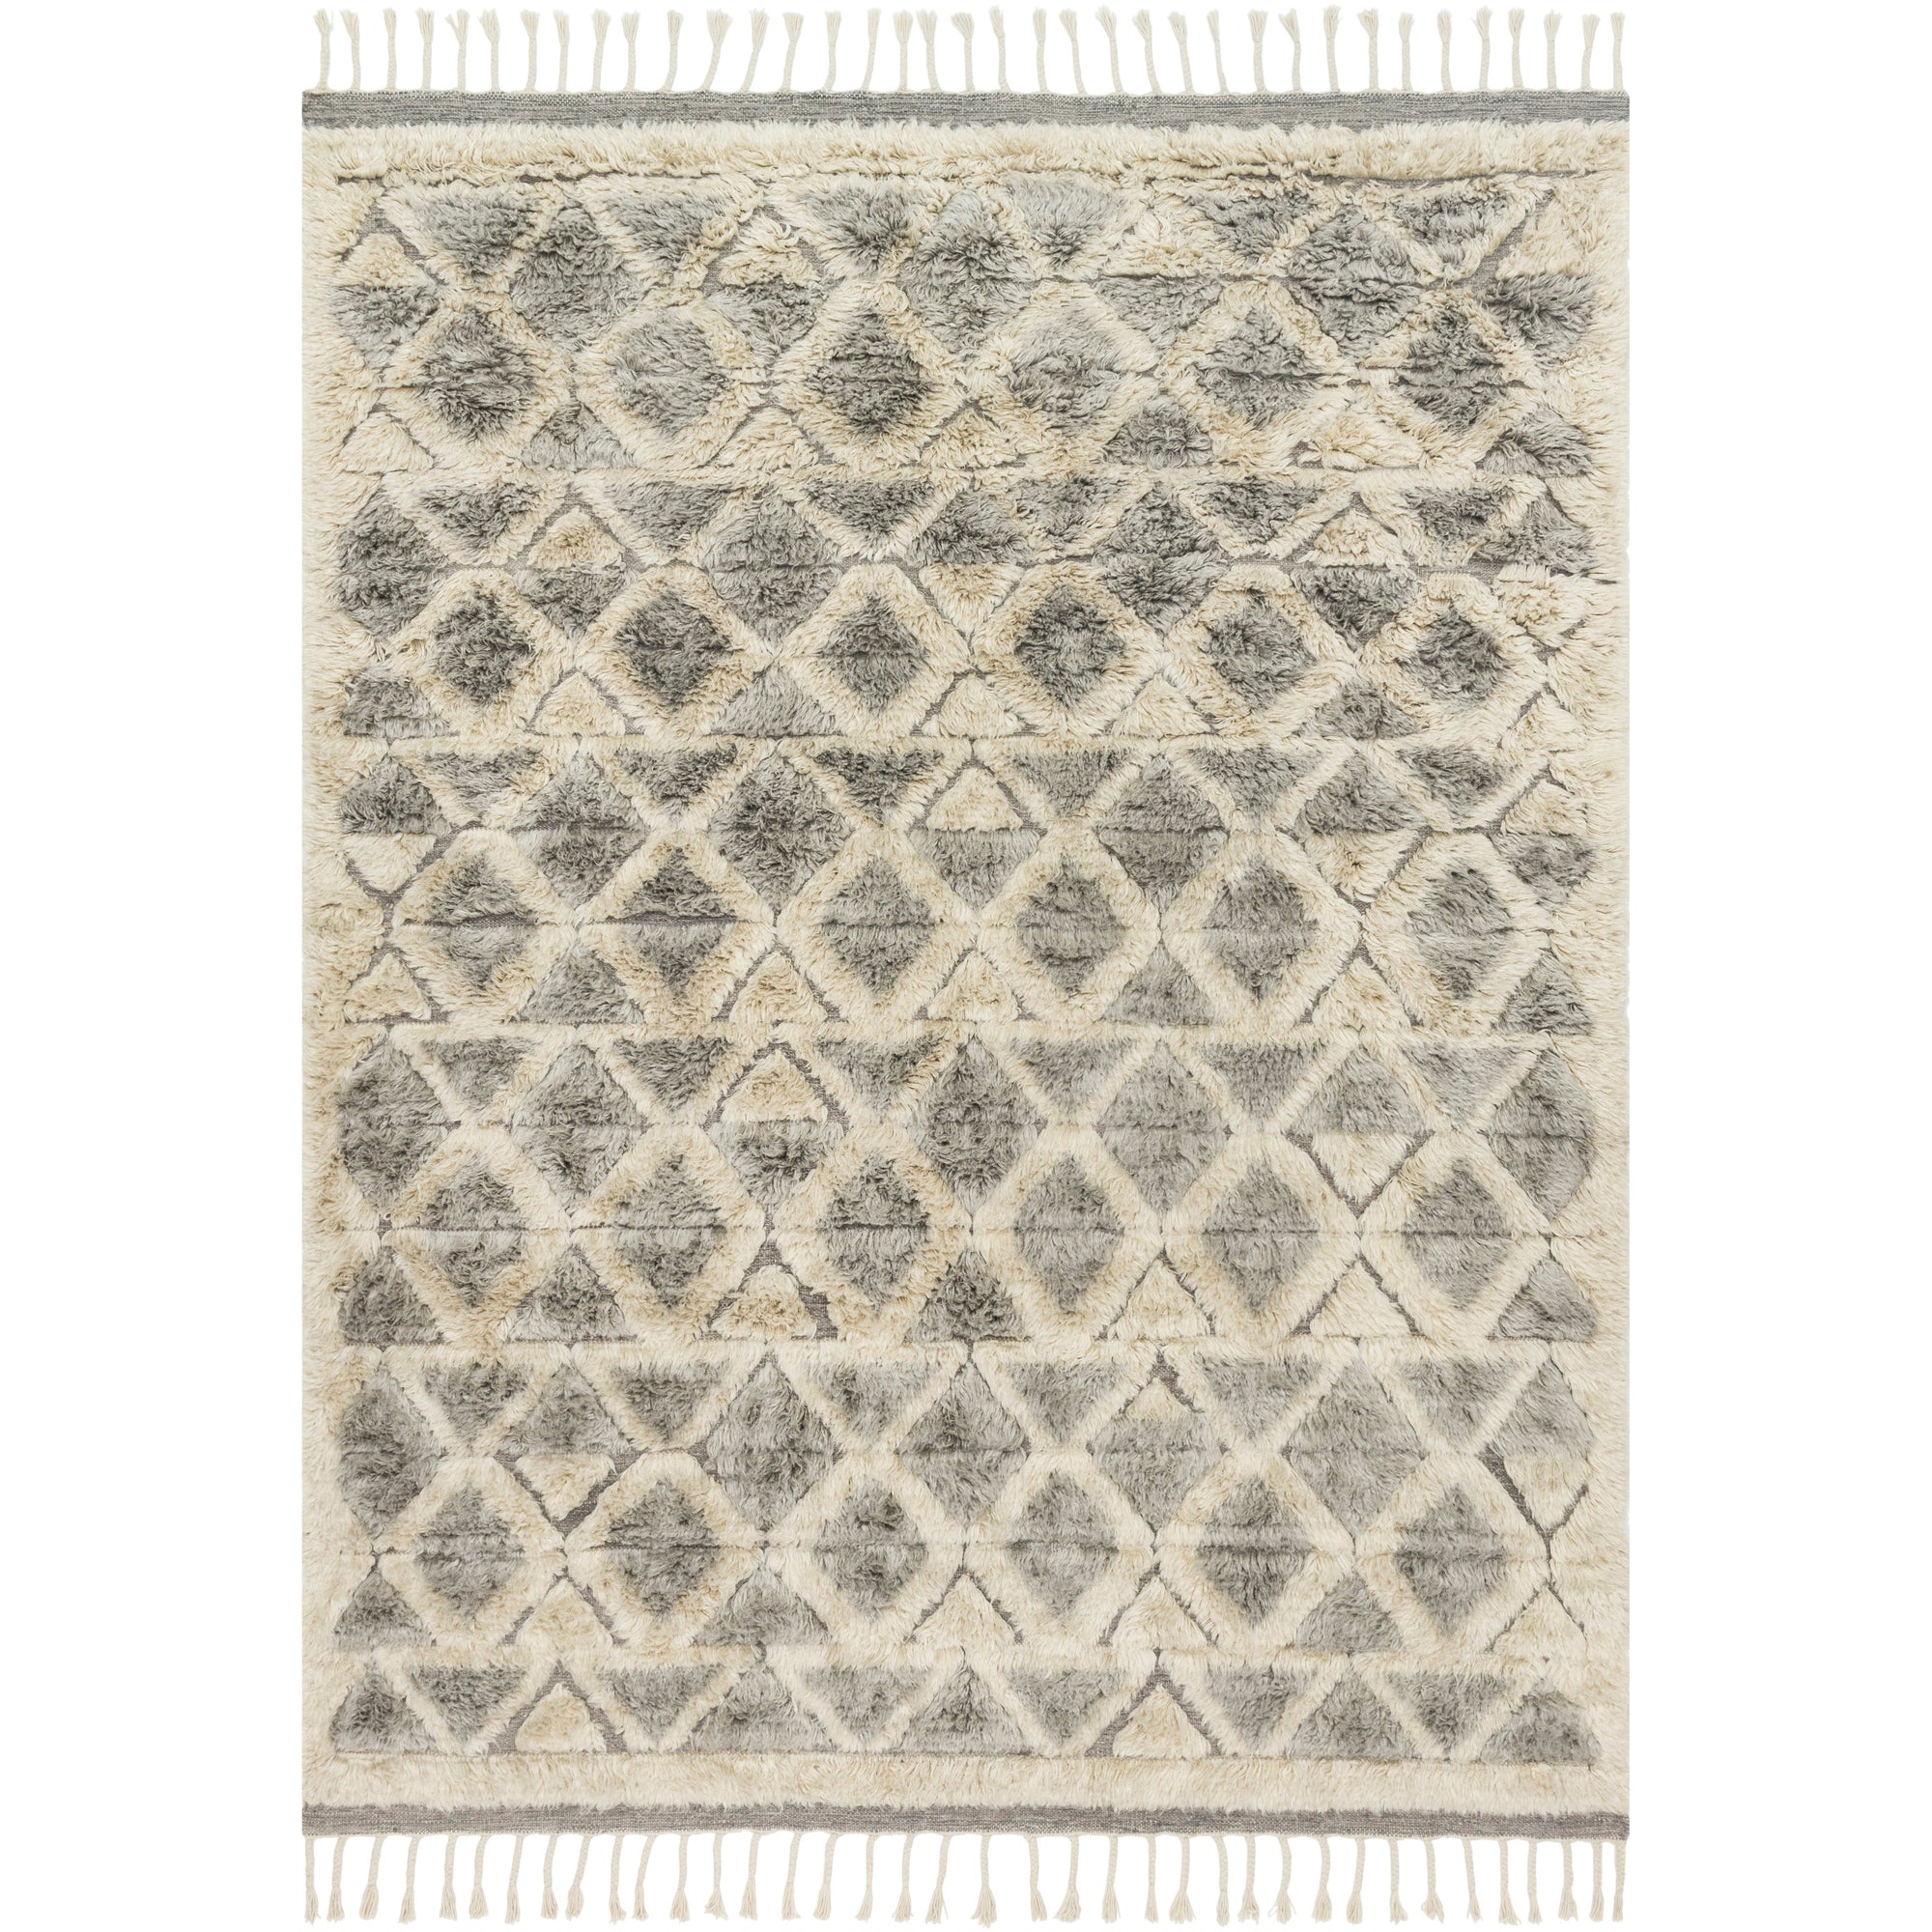 Rugs by Roo Loloi Hygge Smoke Taupe Area Rug in size 18" x 18" Sample